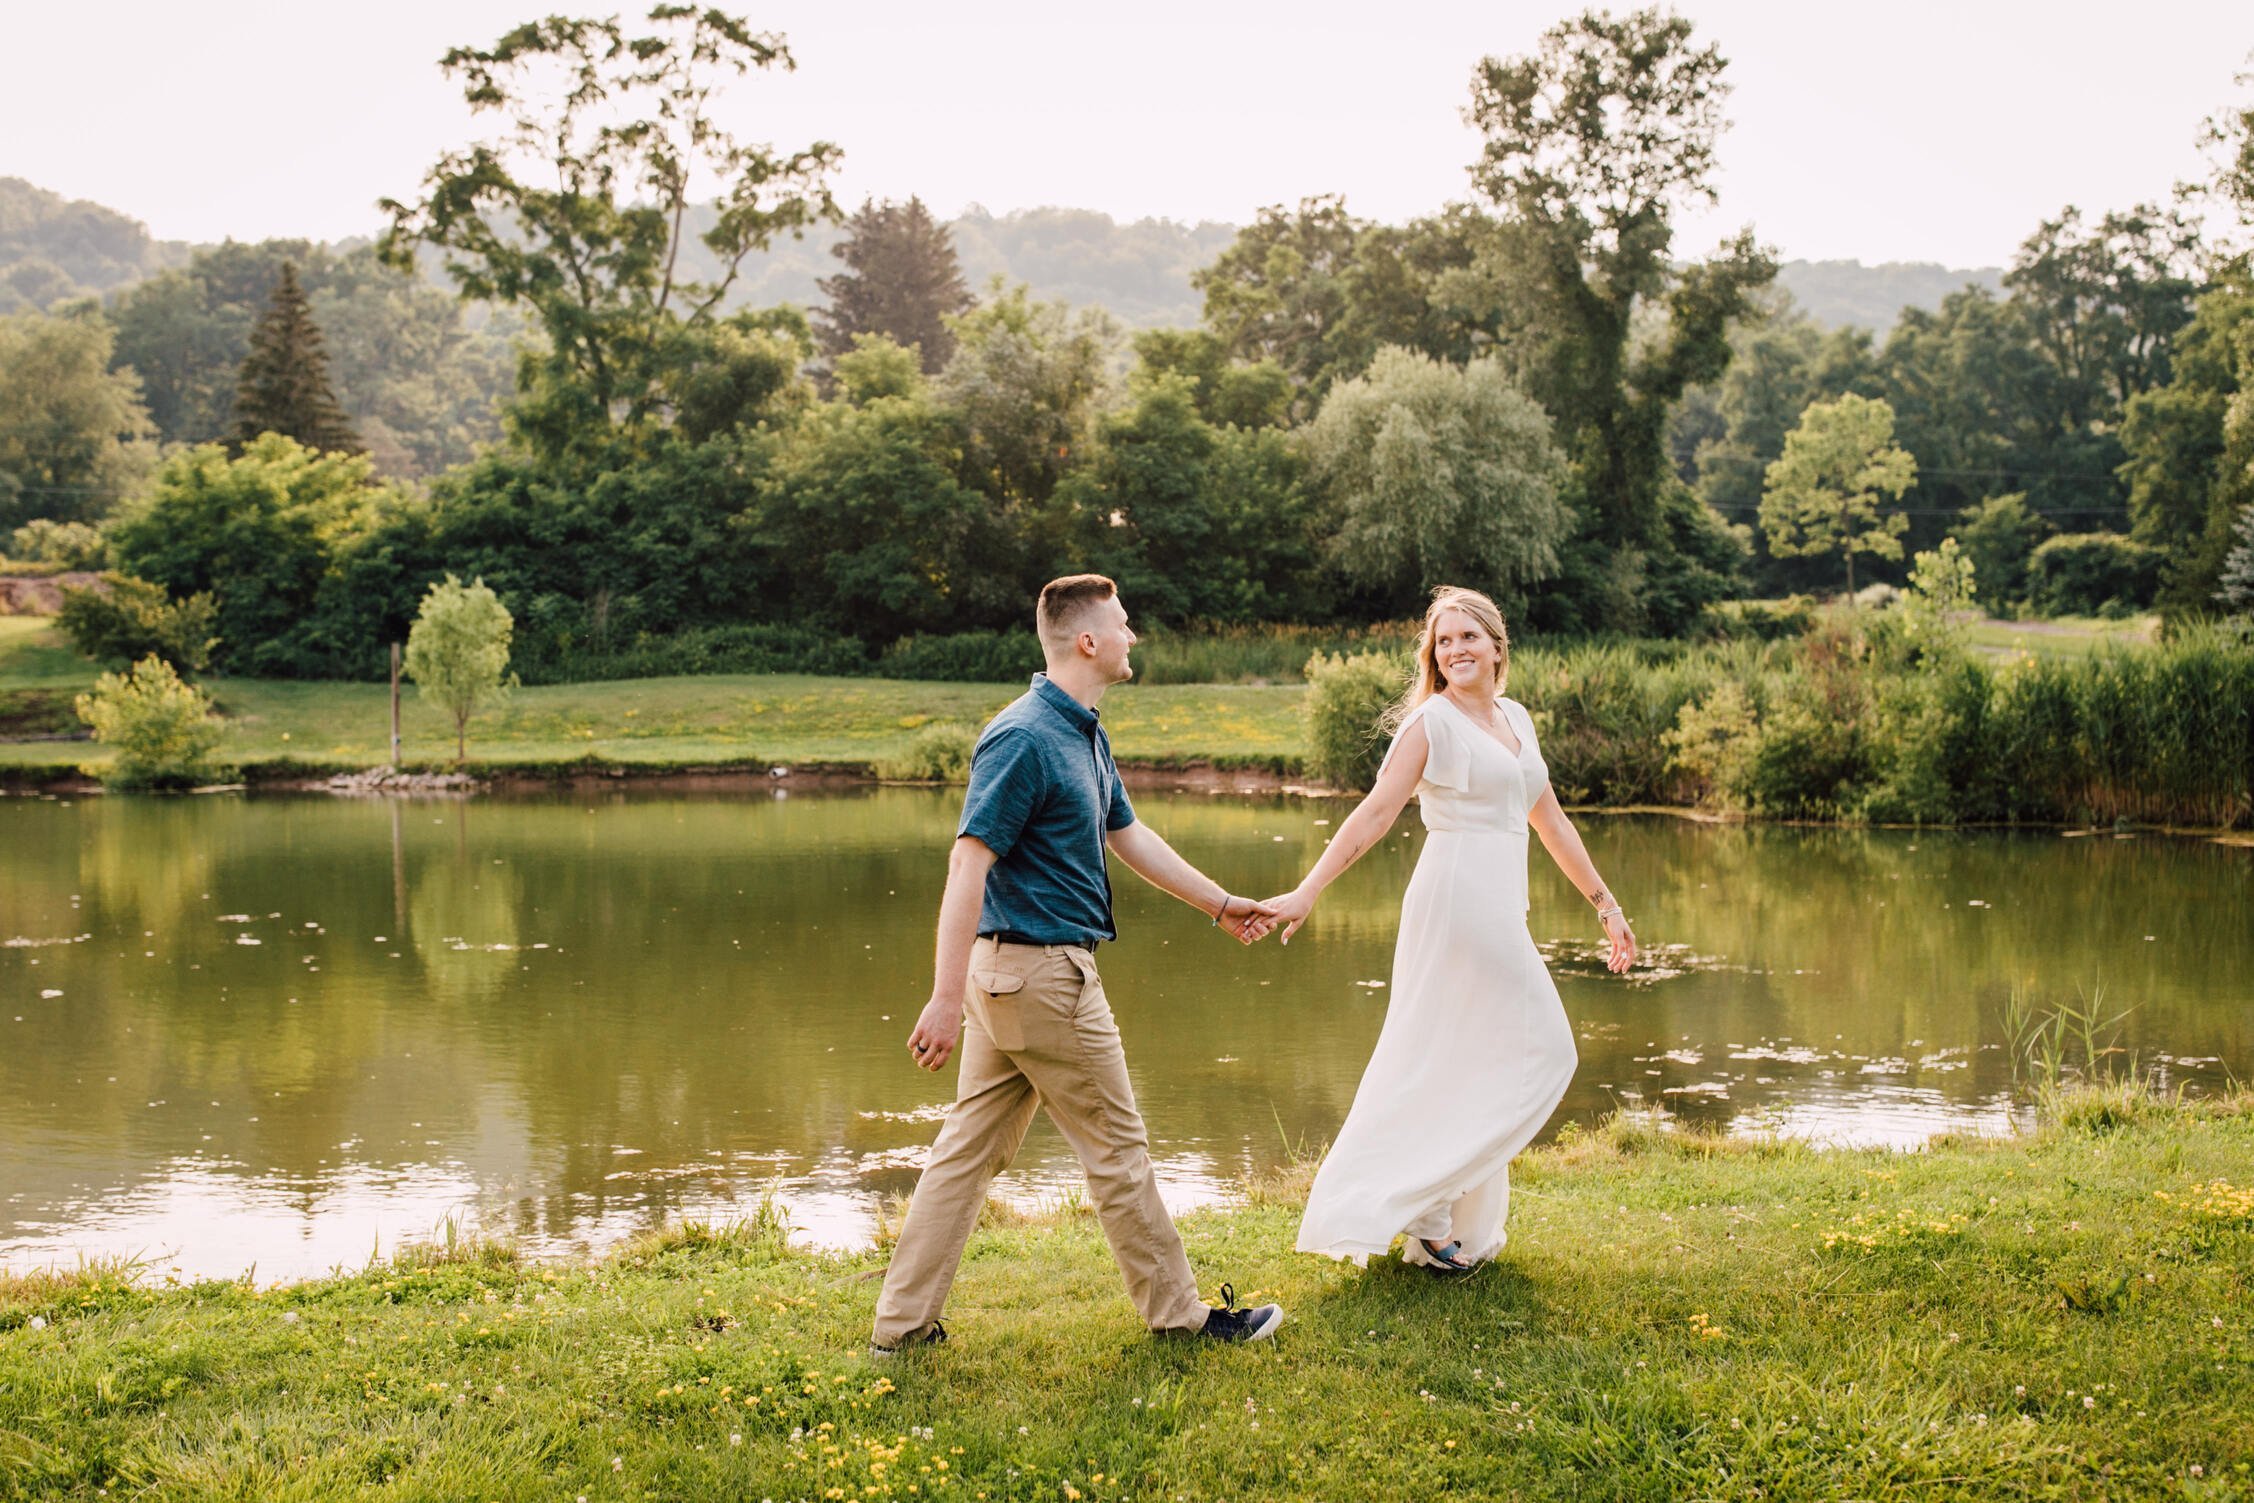  Annie looks back at her fiancé as they walk hand in hand in front of a pond at rocking horse farm 